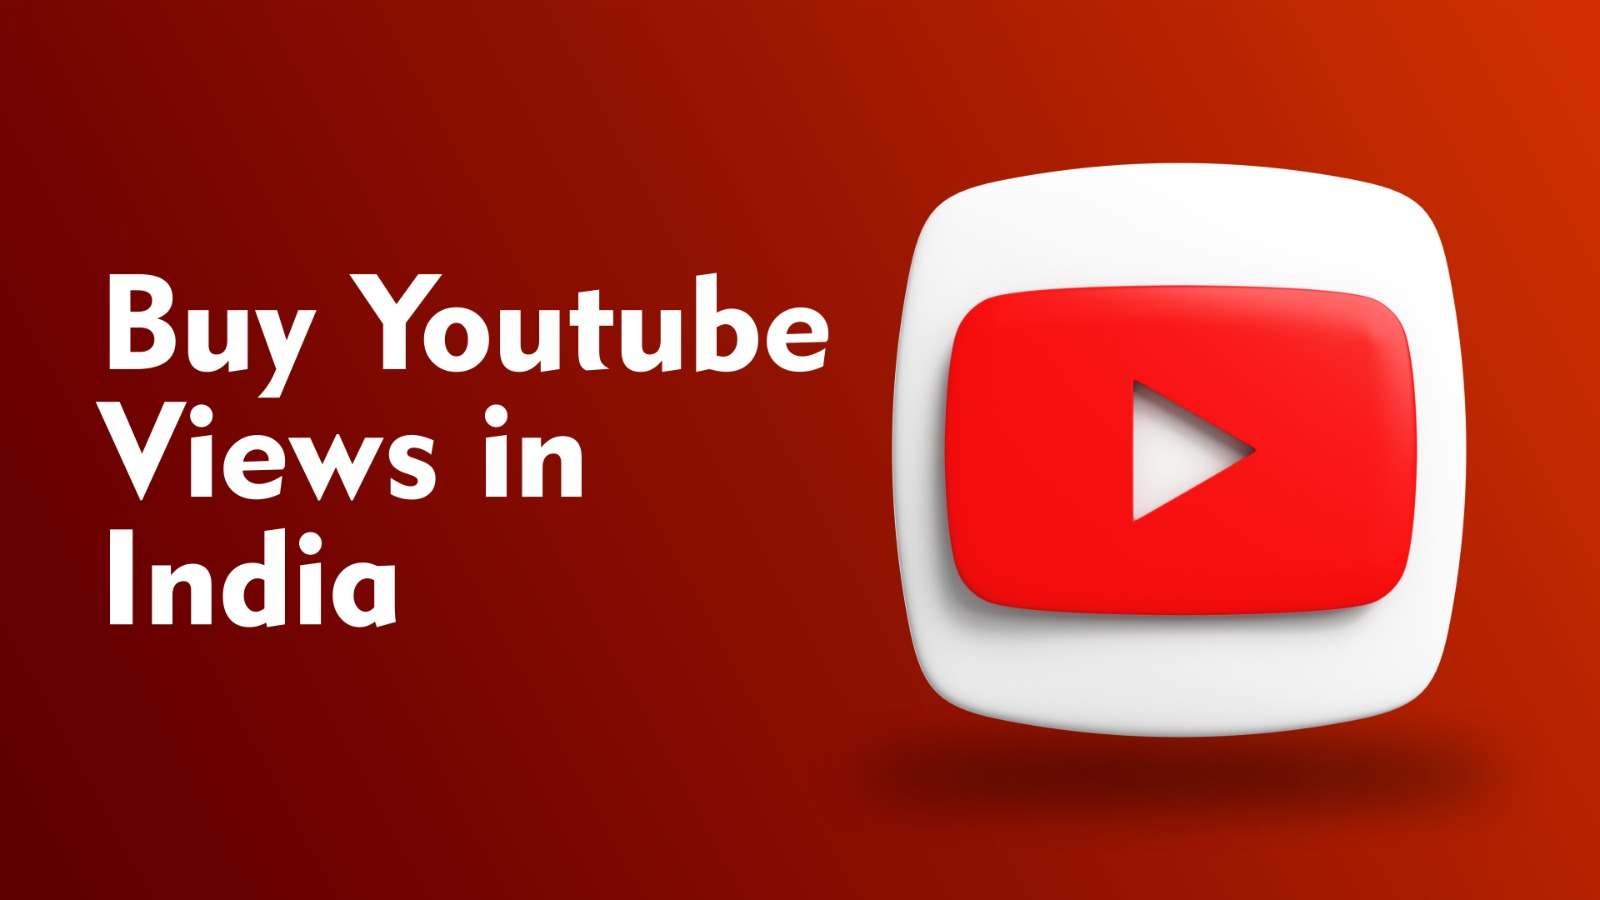 buy youtube views in india, buy youtube views, youtube views india, youtube marketing, boost your channel, youtube promotion, increase views, indian youtubers, youtube strategy, social media marketing, youtube growth, buy views online, youtube tips, youtube influencers, video promotion, get more views, youtube engagement, digital marketing india, youtube success, youtube seo, real youtube views